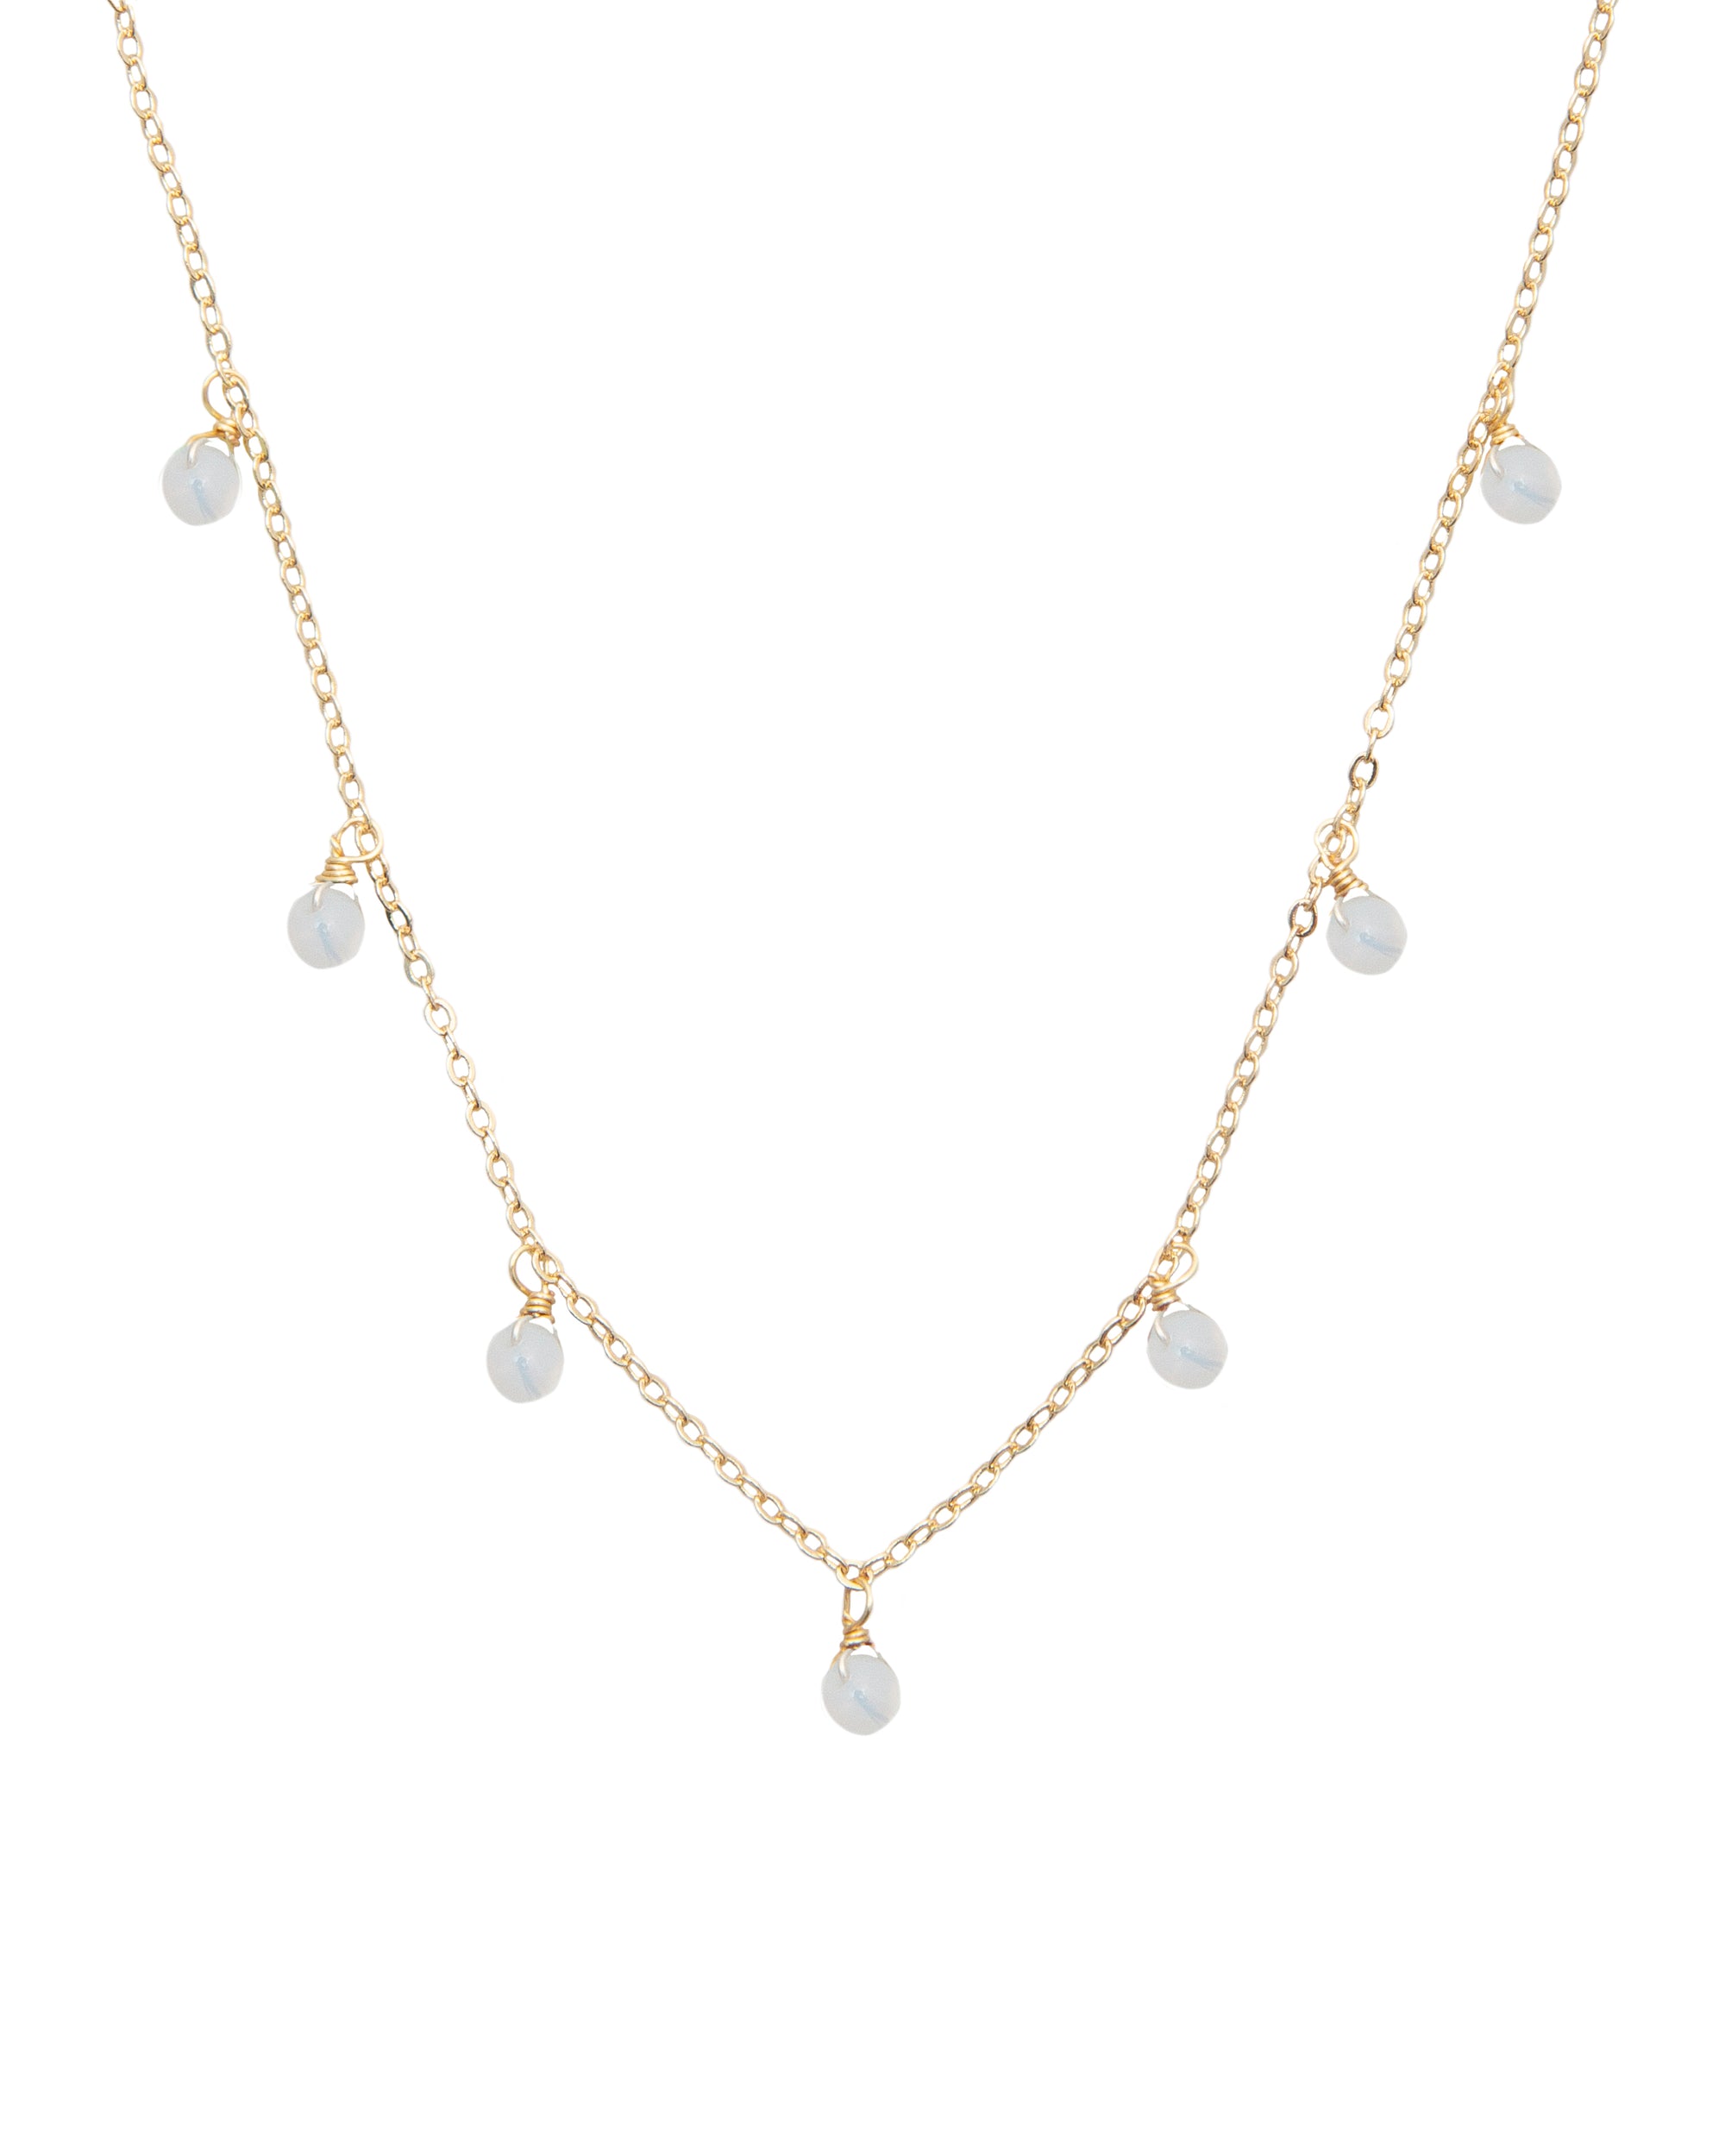 Moonstone dewdrop charm necklace on gold chain